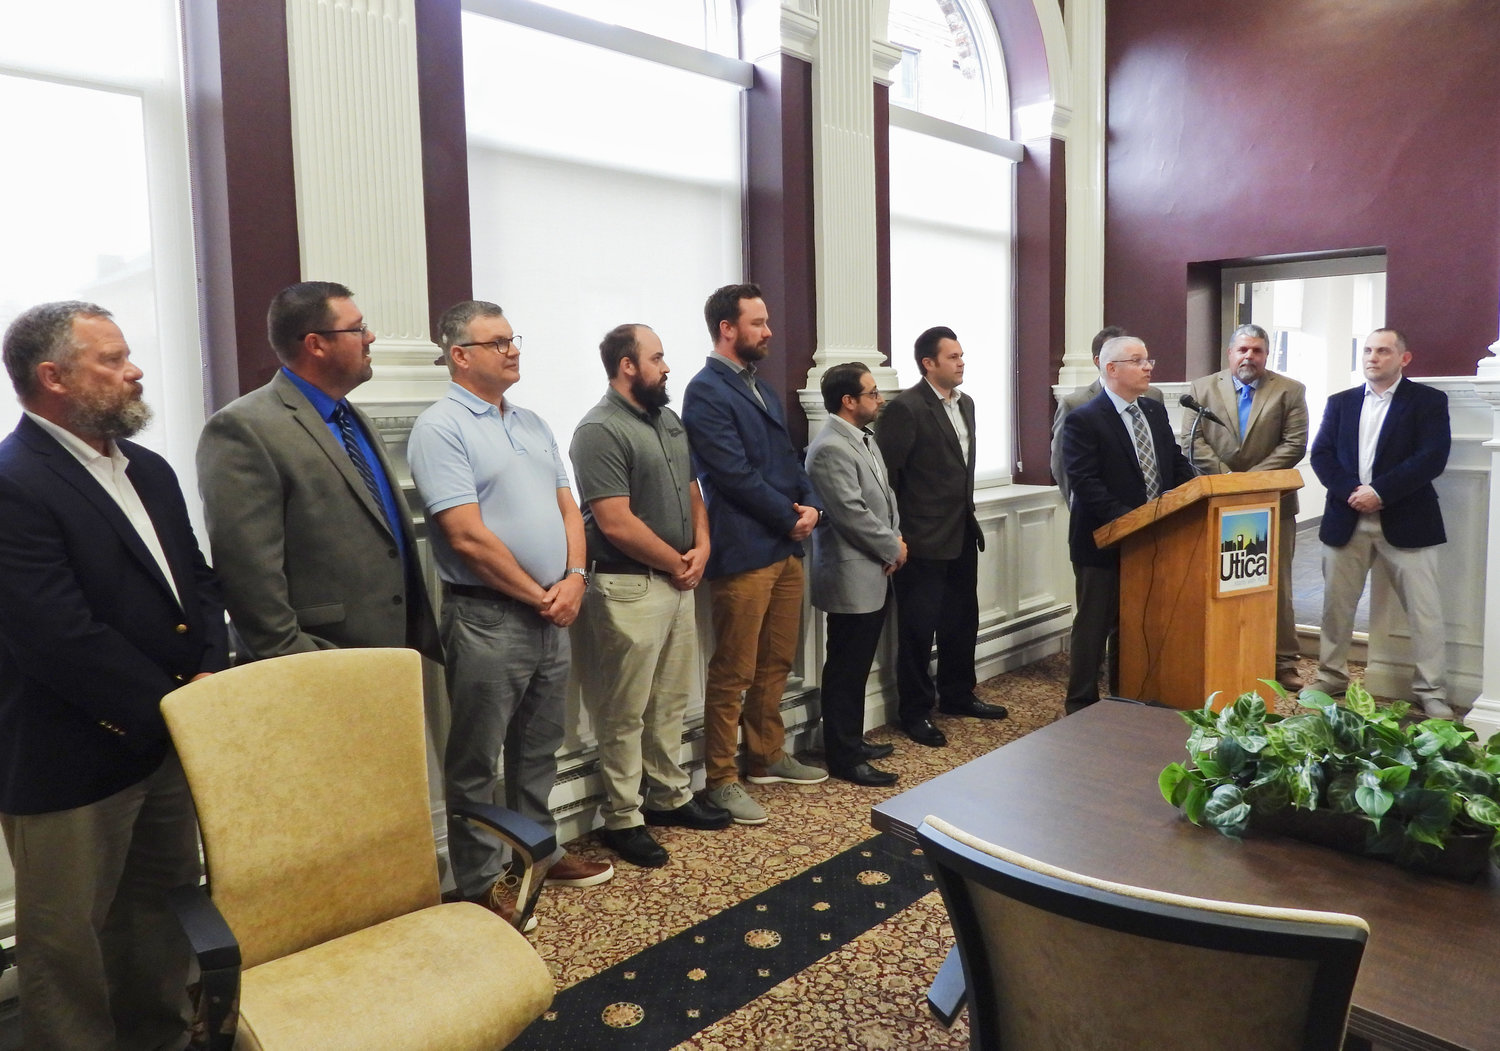 Barton & Loguidice President and CEO John Brusa explains the move to Utica and all its benefits to both current and future employees of the multi-disciplinary consulting firm. Pictured are a number of B & L employees, many of whom are Utica locals.